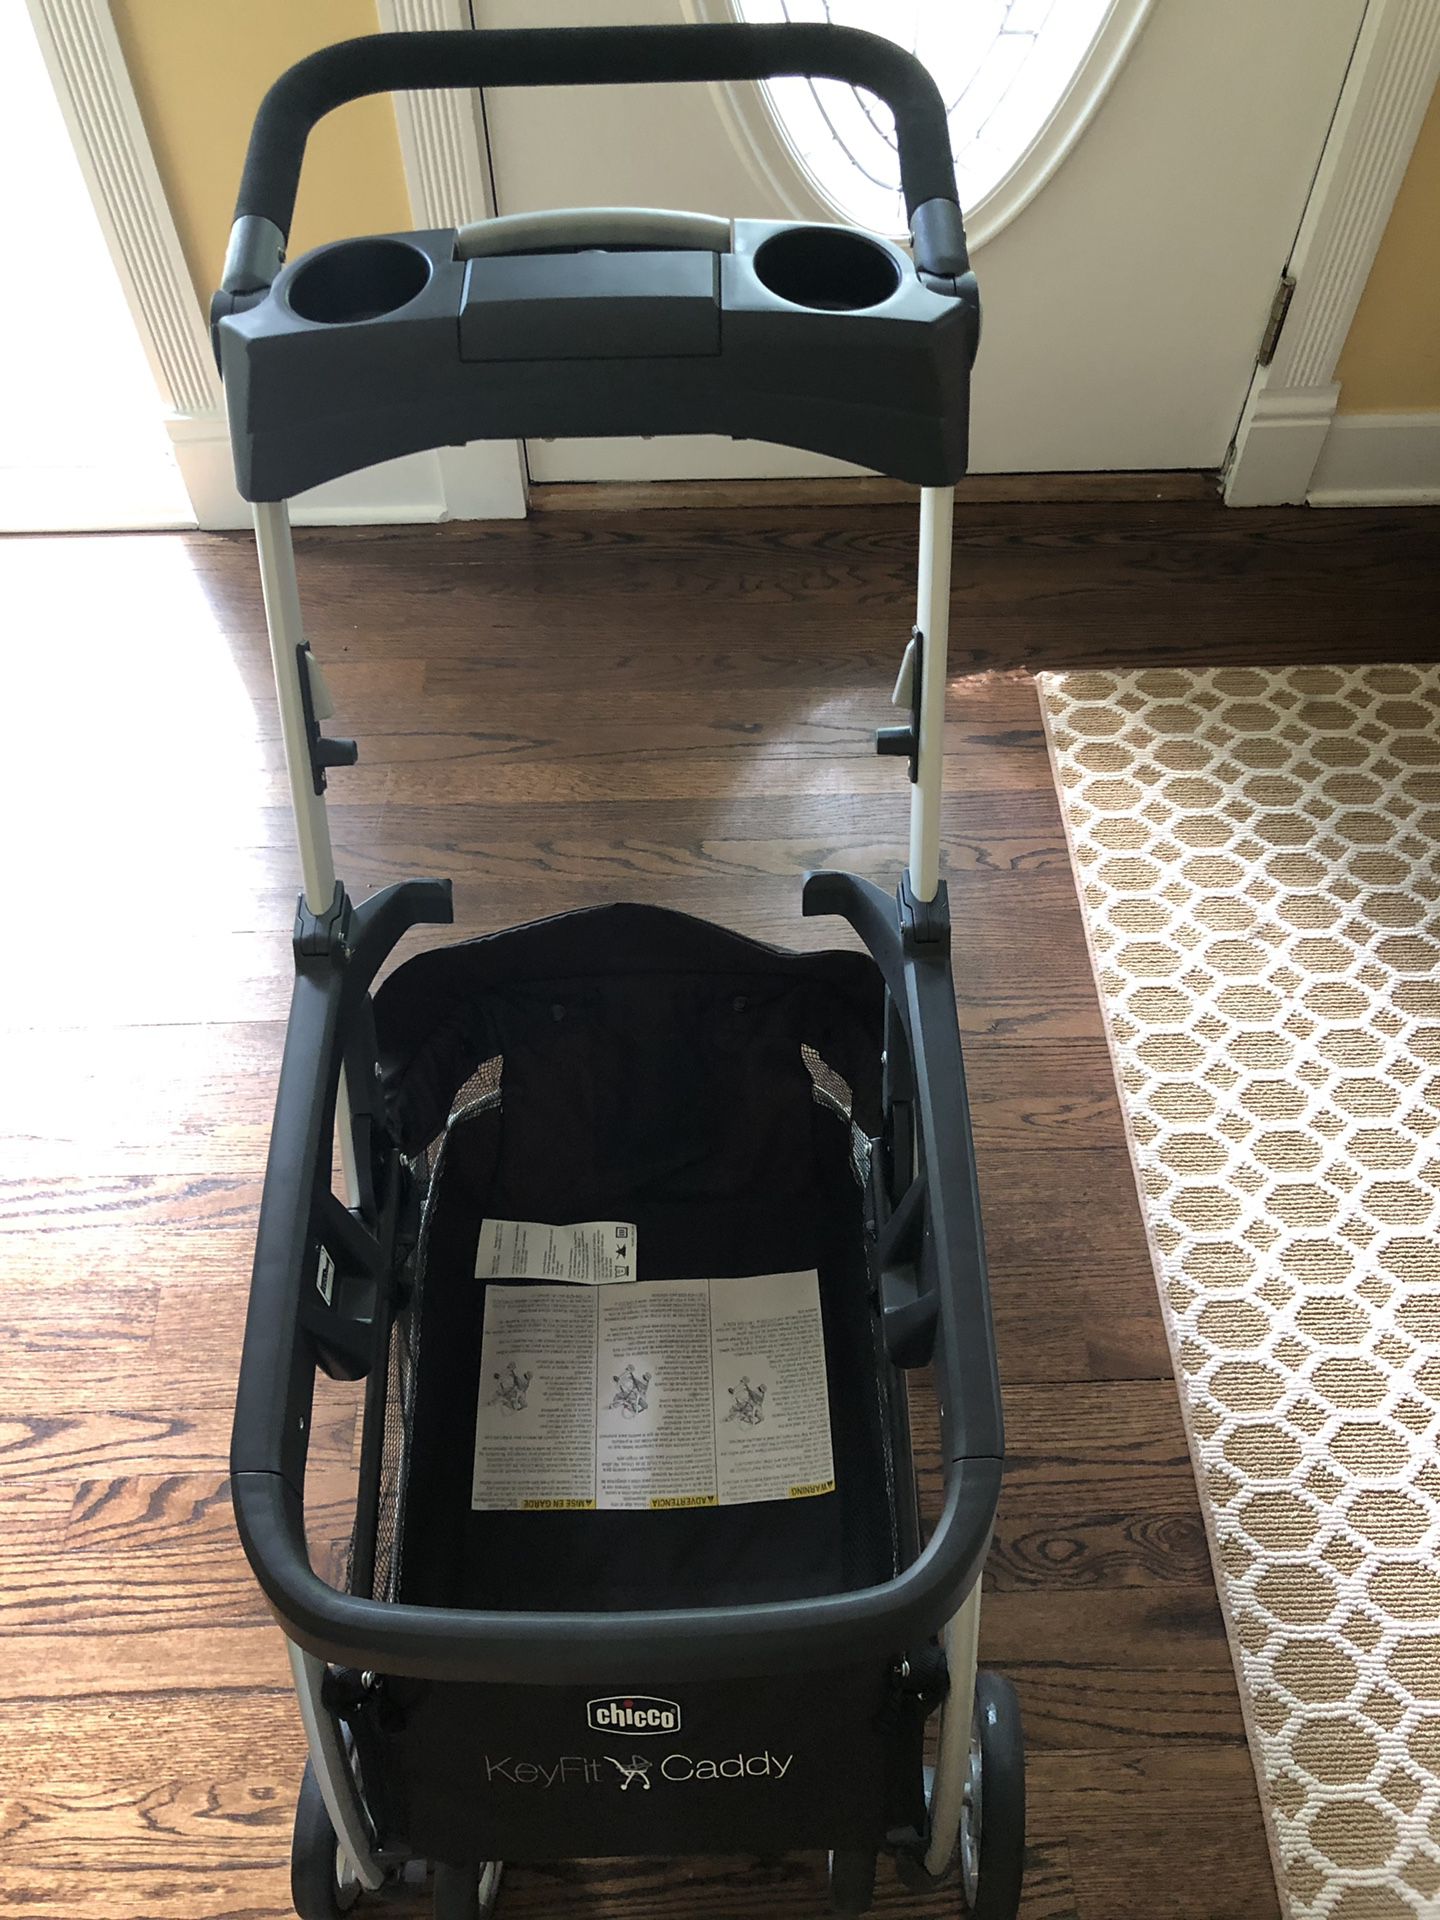 Chicco caddy - light weight stroller